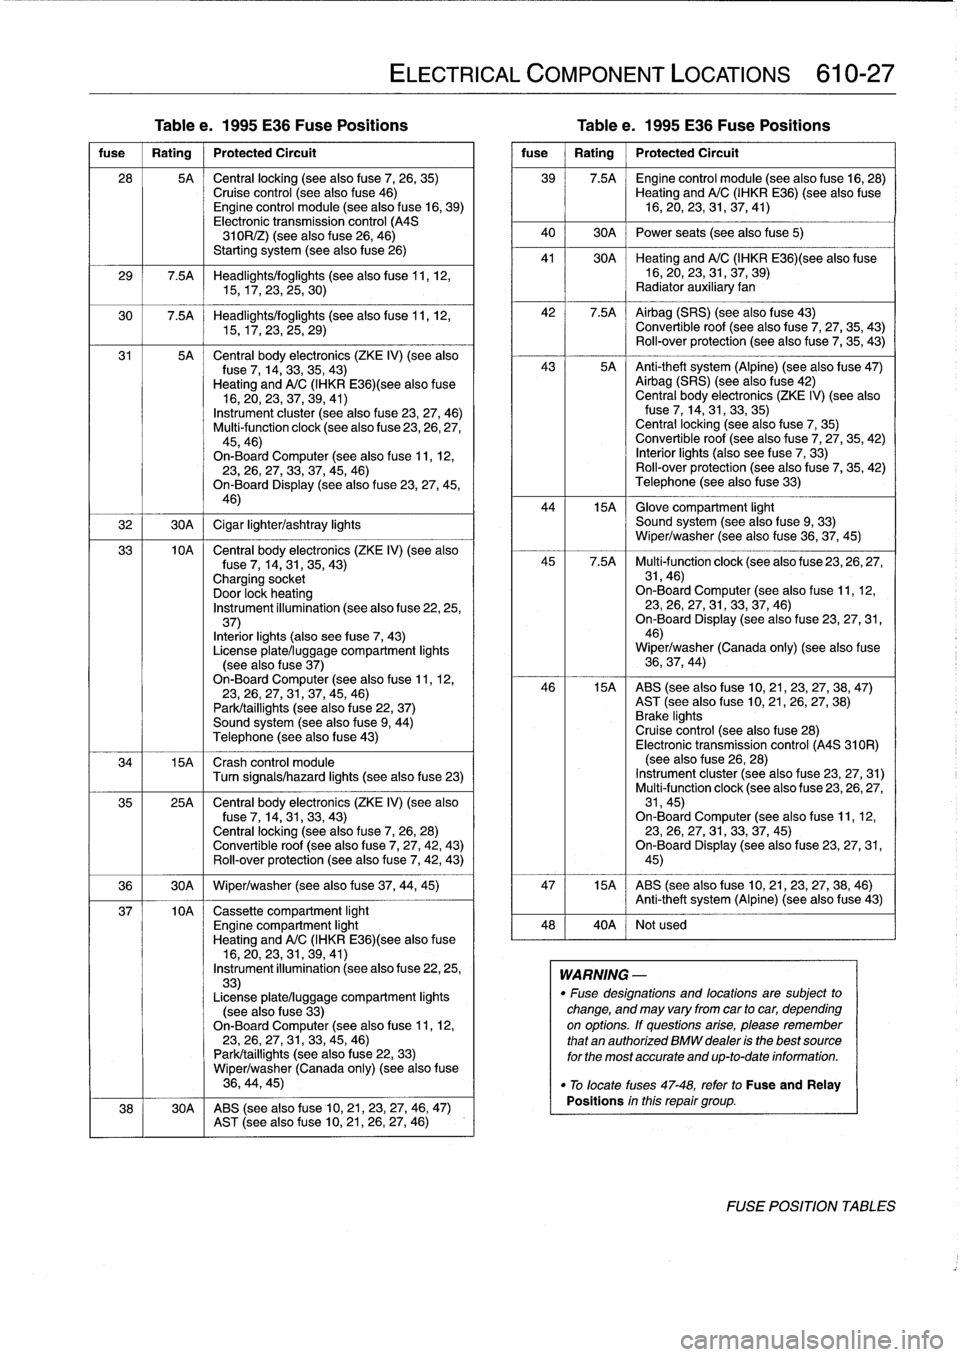 BMW 318i 1997 E36 Workshop Manual Tablee
.
1995
E36
Fuse
Positions

	

Table
e
.
1995
E36
Fuse
Positions

fuse

	

I
Rating

	

1
Protected
Circuit

28

	

5A

	

Central
locking
(see
alsofuse
7,
26,
35)Cruise
control
(see
also
fuse
4